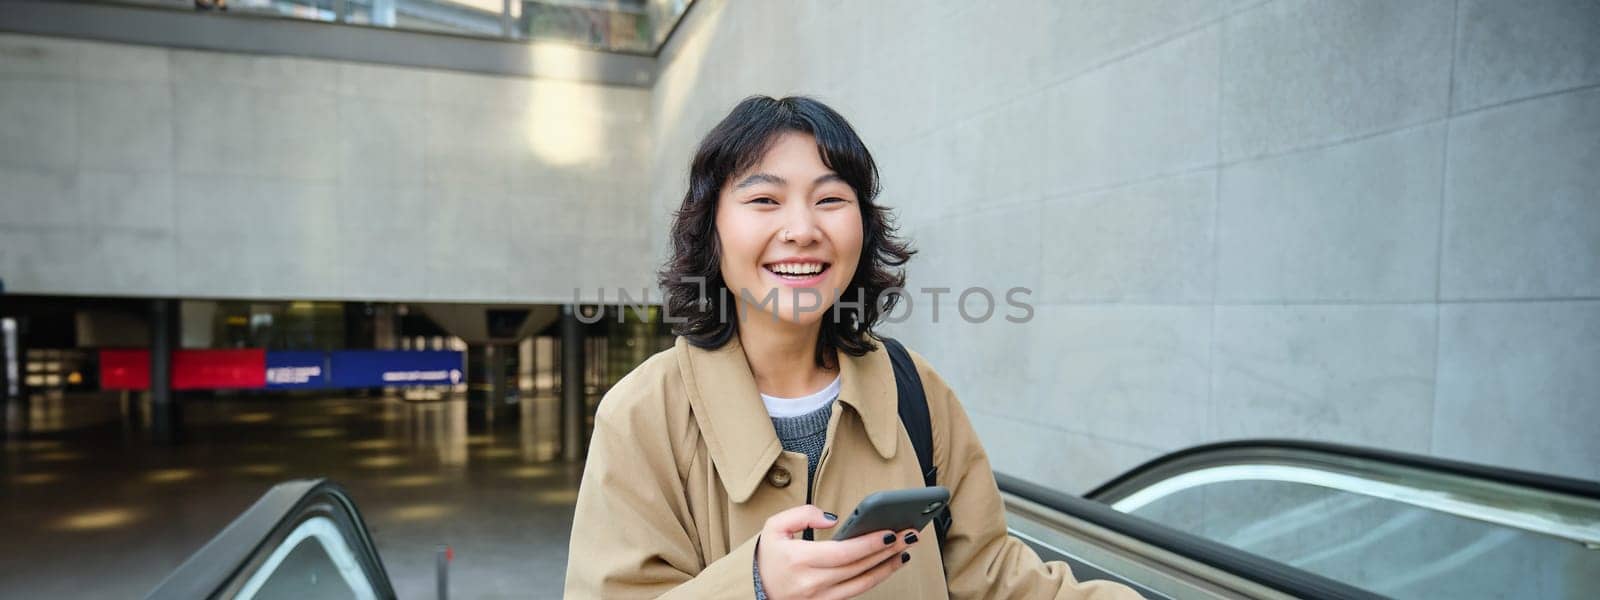 Technology and people concept. Smiling brunette woman travels around city, holds smartphone and laughs, uses mobile phone on her way home, stands on escalator.